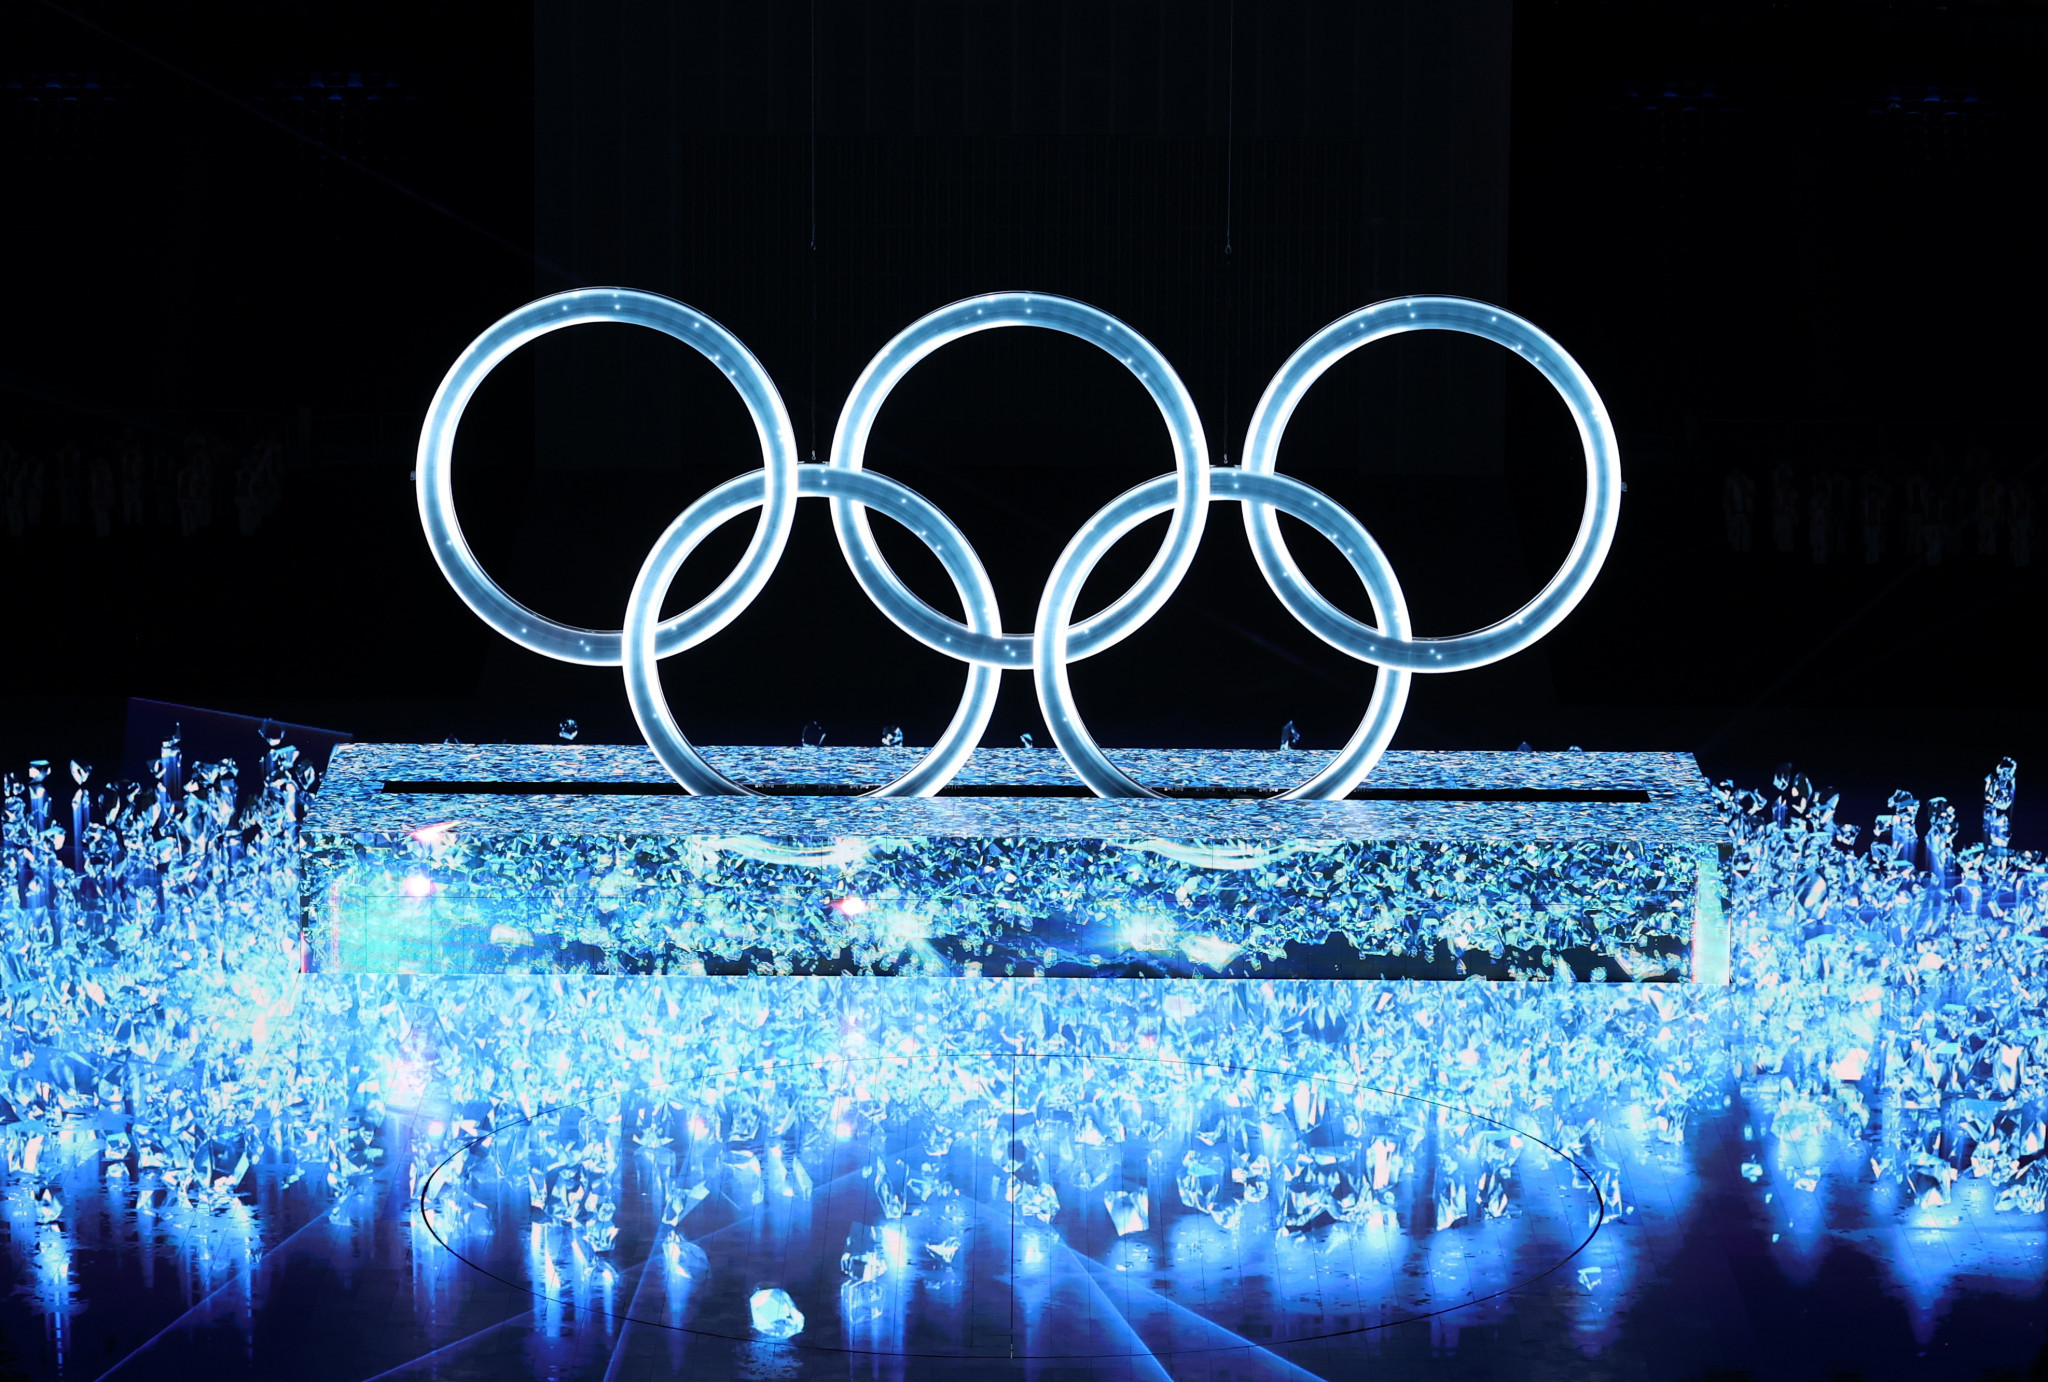 The IOC has mooted using a pool of host cities for future Winter Games, and Sarah Hirshland believes Salt Lake City 